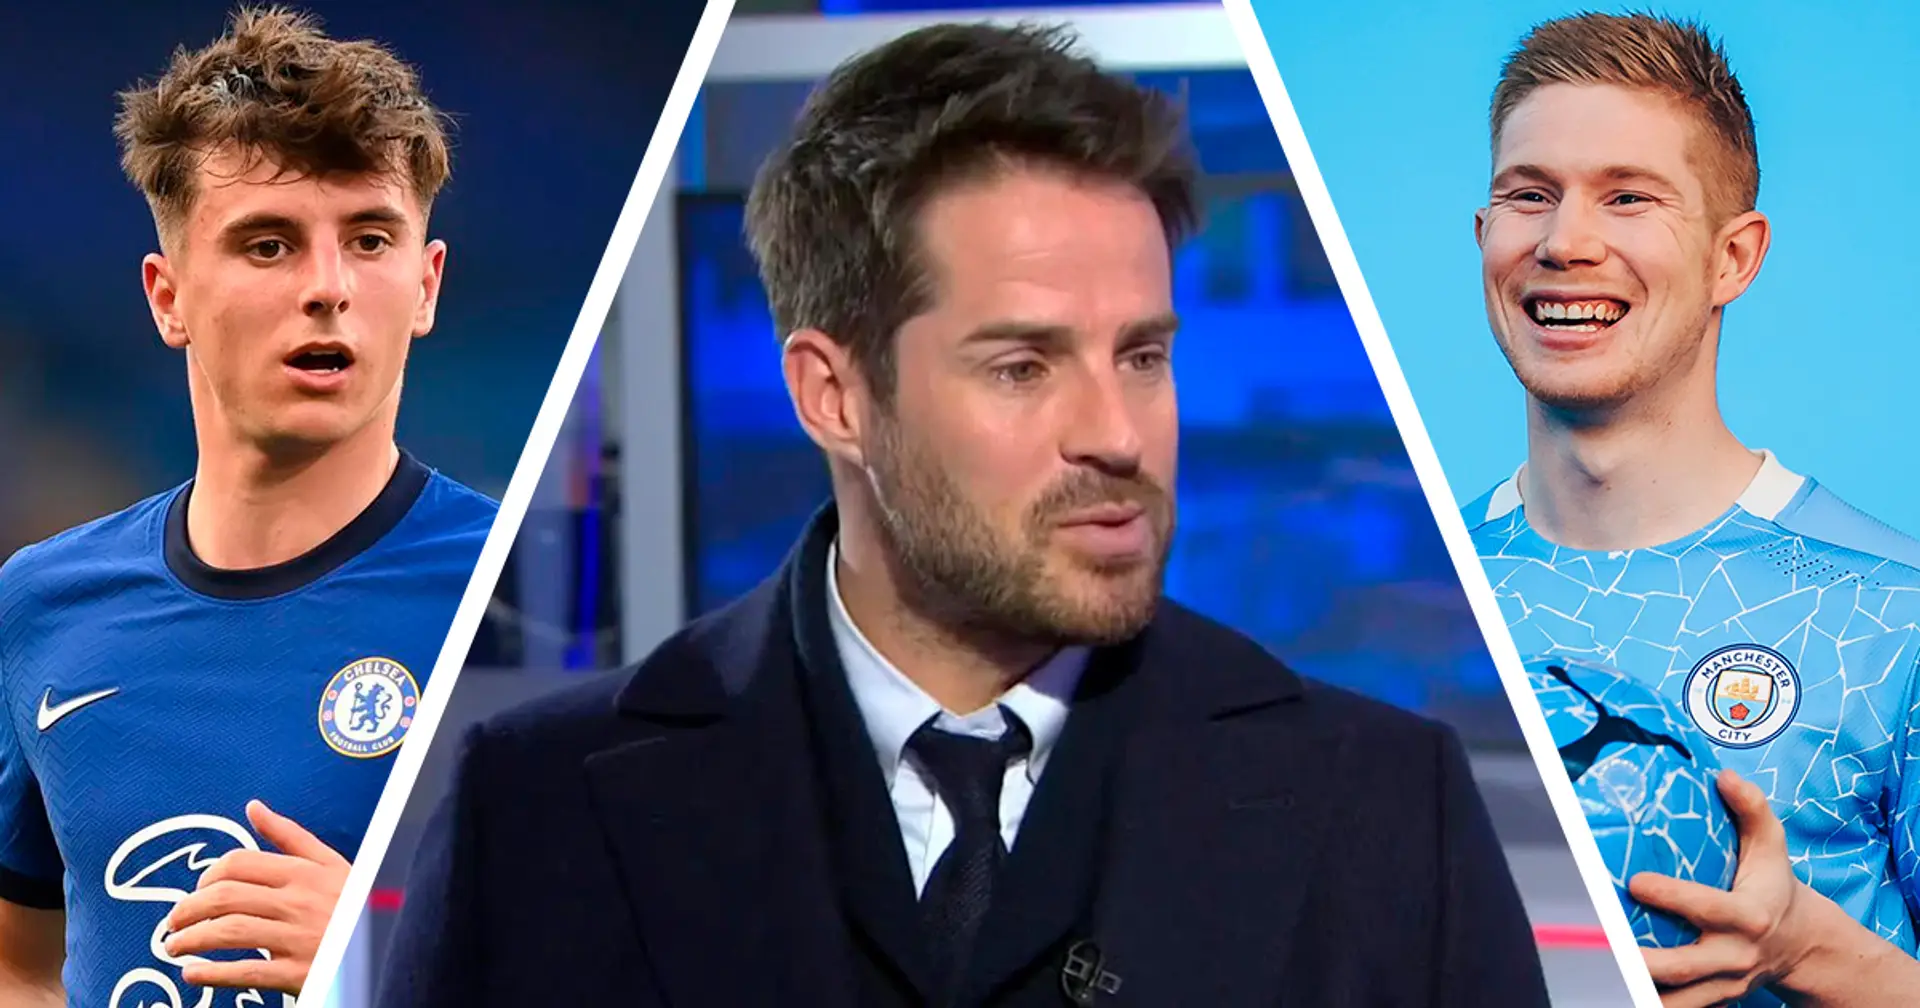 Jamie Redknapp claims Mason Mount could become England's Kevin De Bruyne